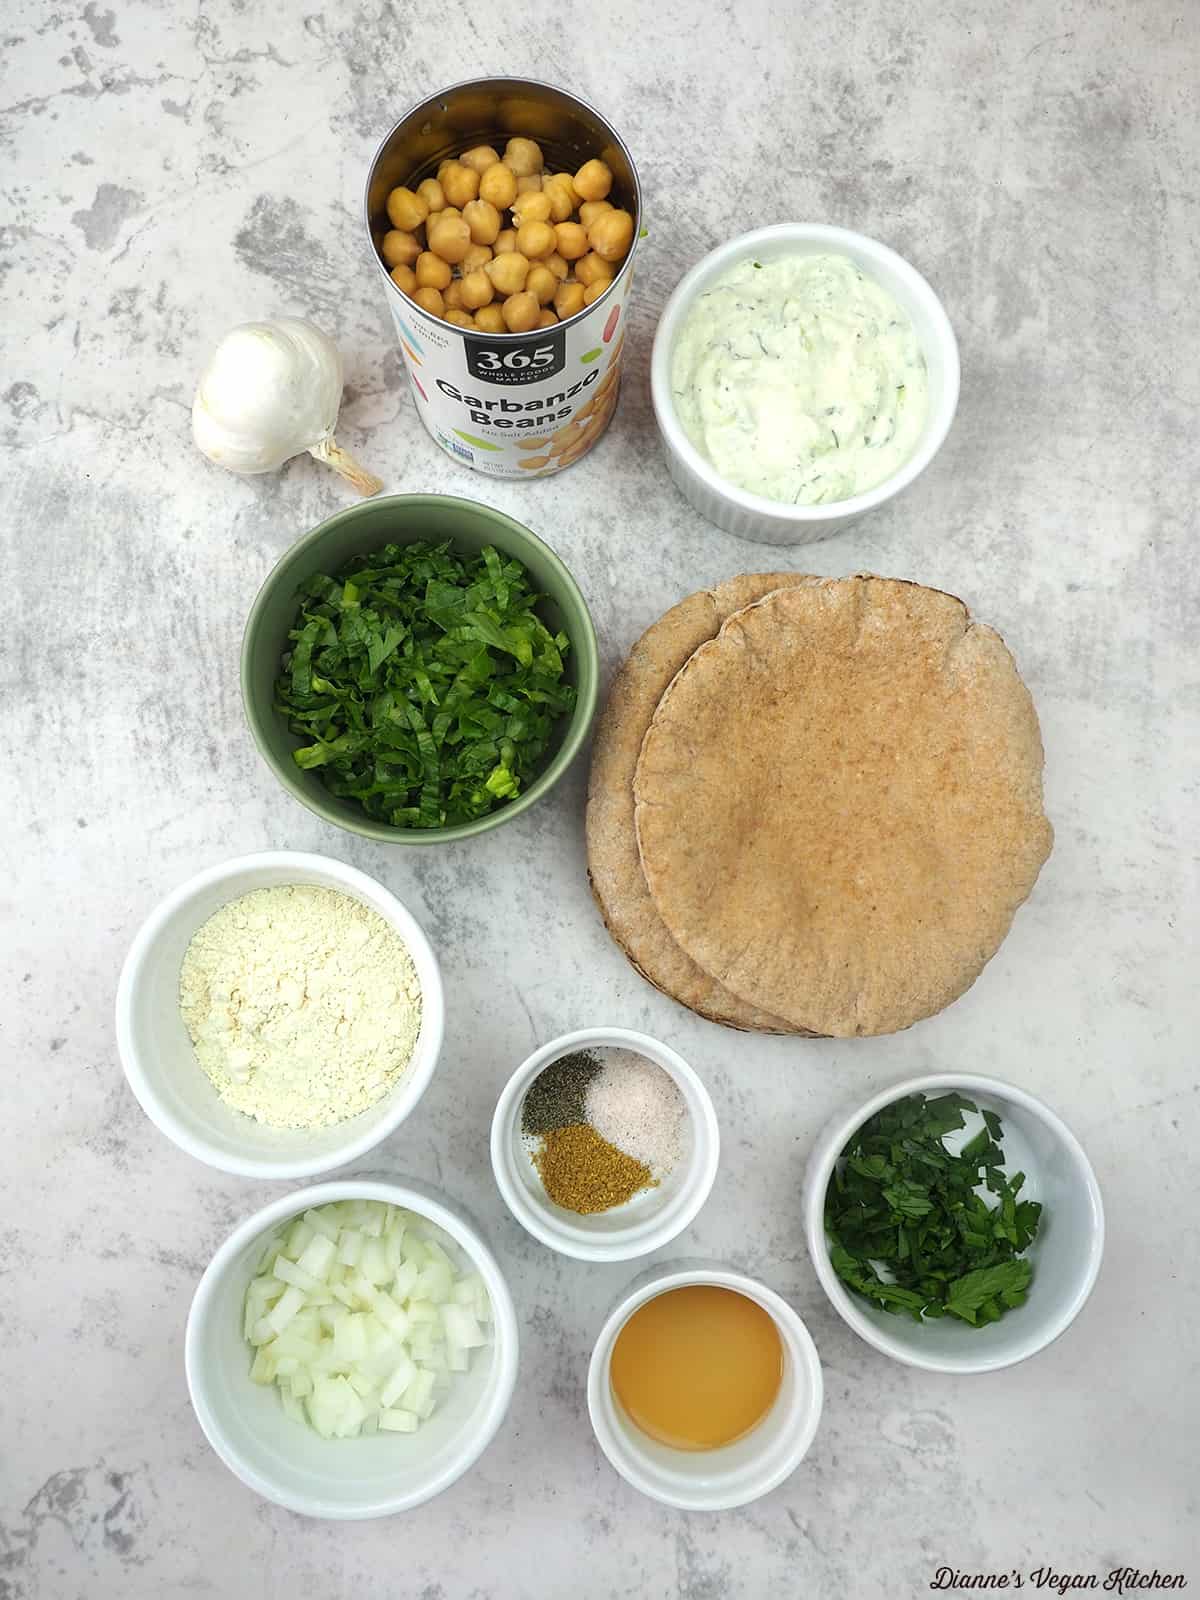 garlic, chickpeas, sauce, lettuce, pitas, spices, parsley, onions, vegetable stock, and chickpea flour